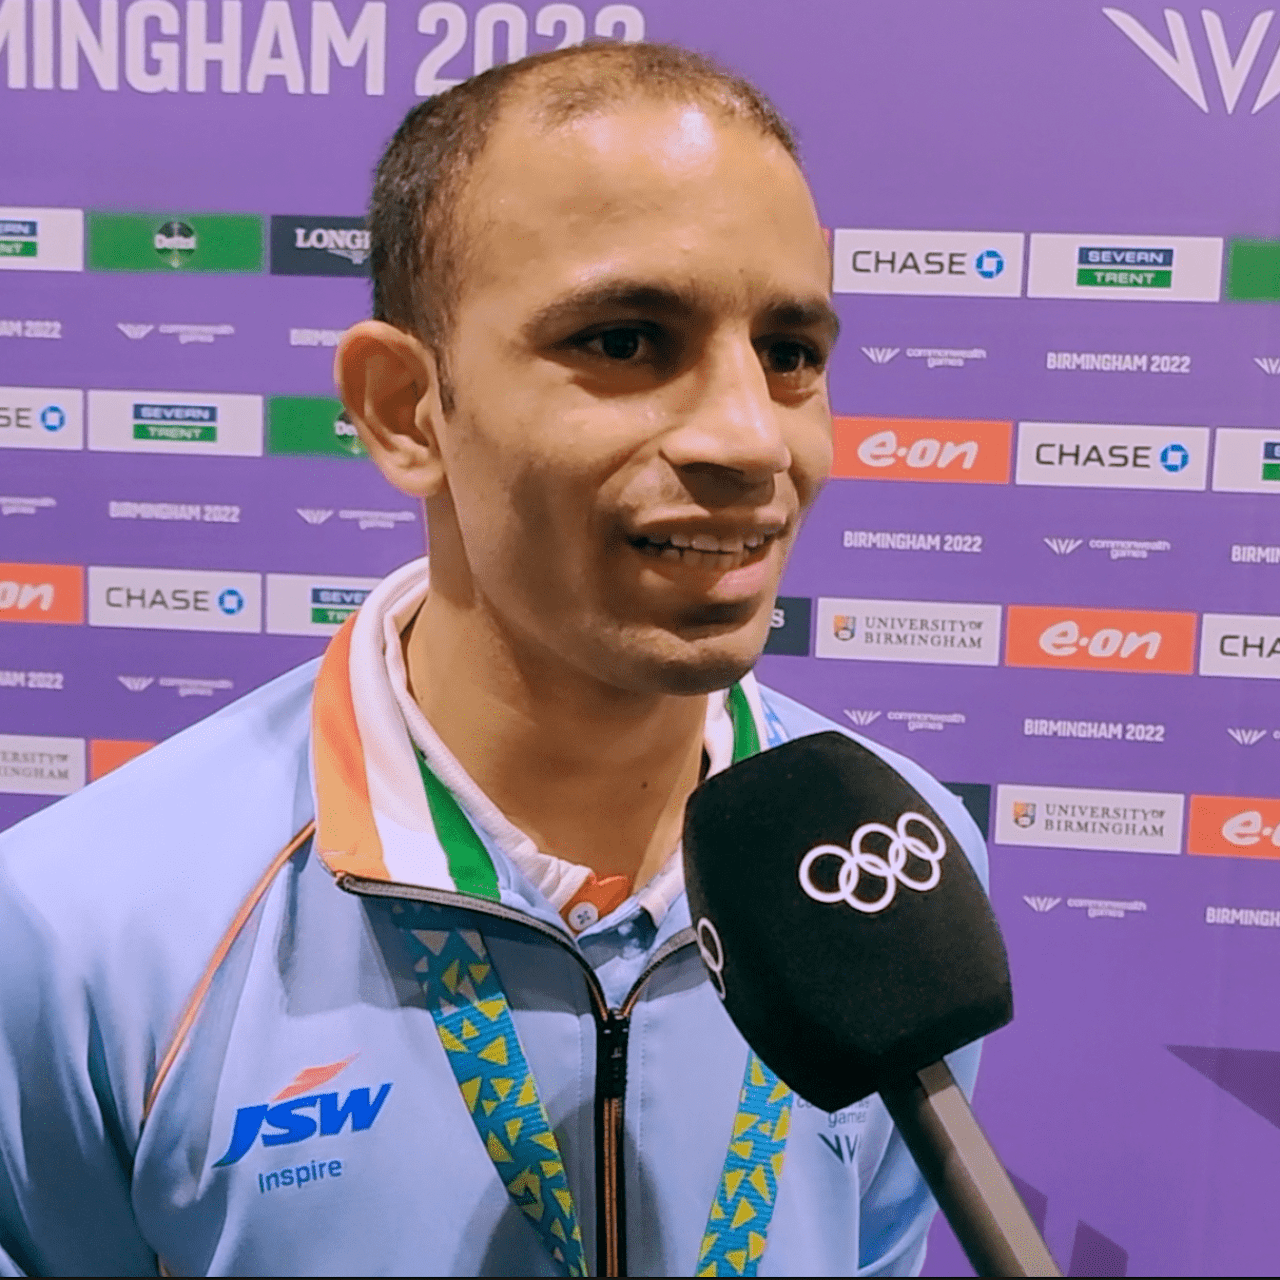 Amit Panghal clinches gold in flyweight boxing, wins his second CWG medal -  Hindustan Times